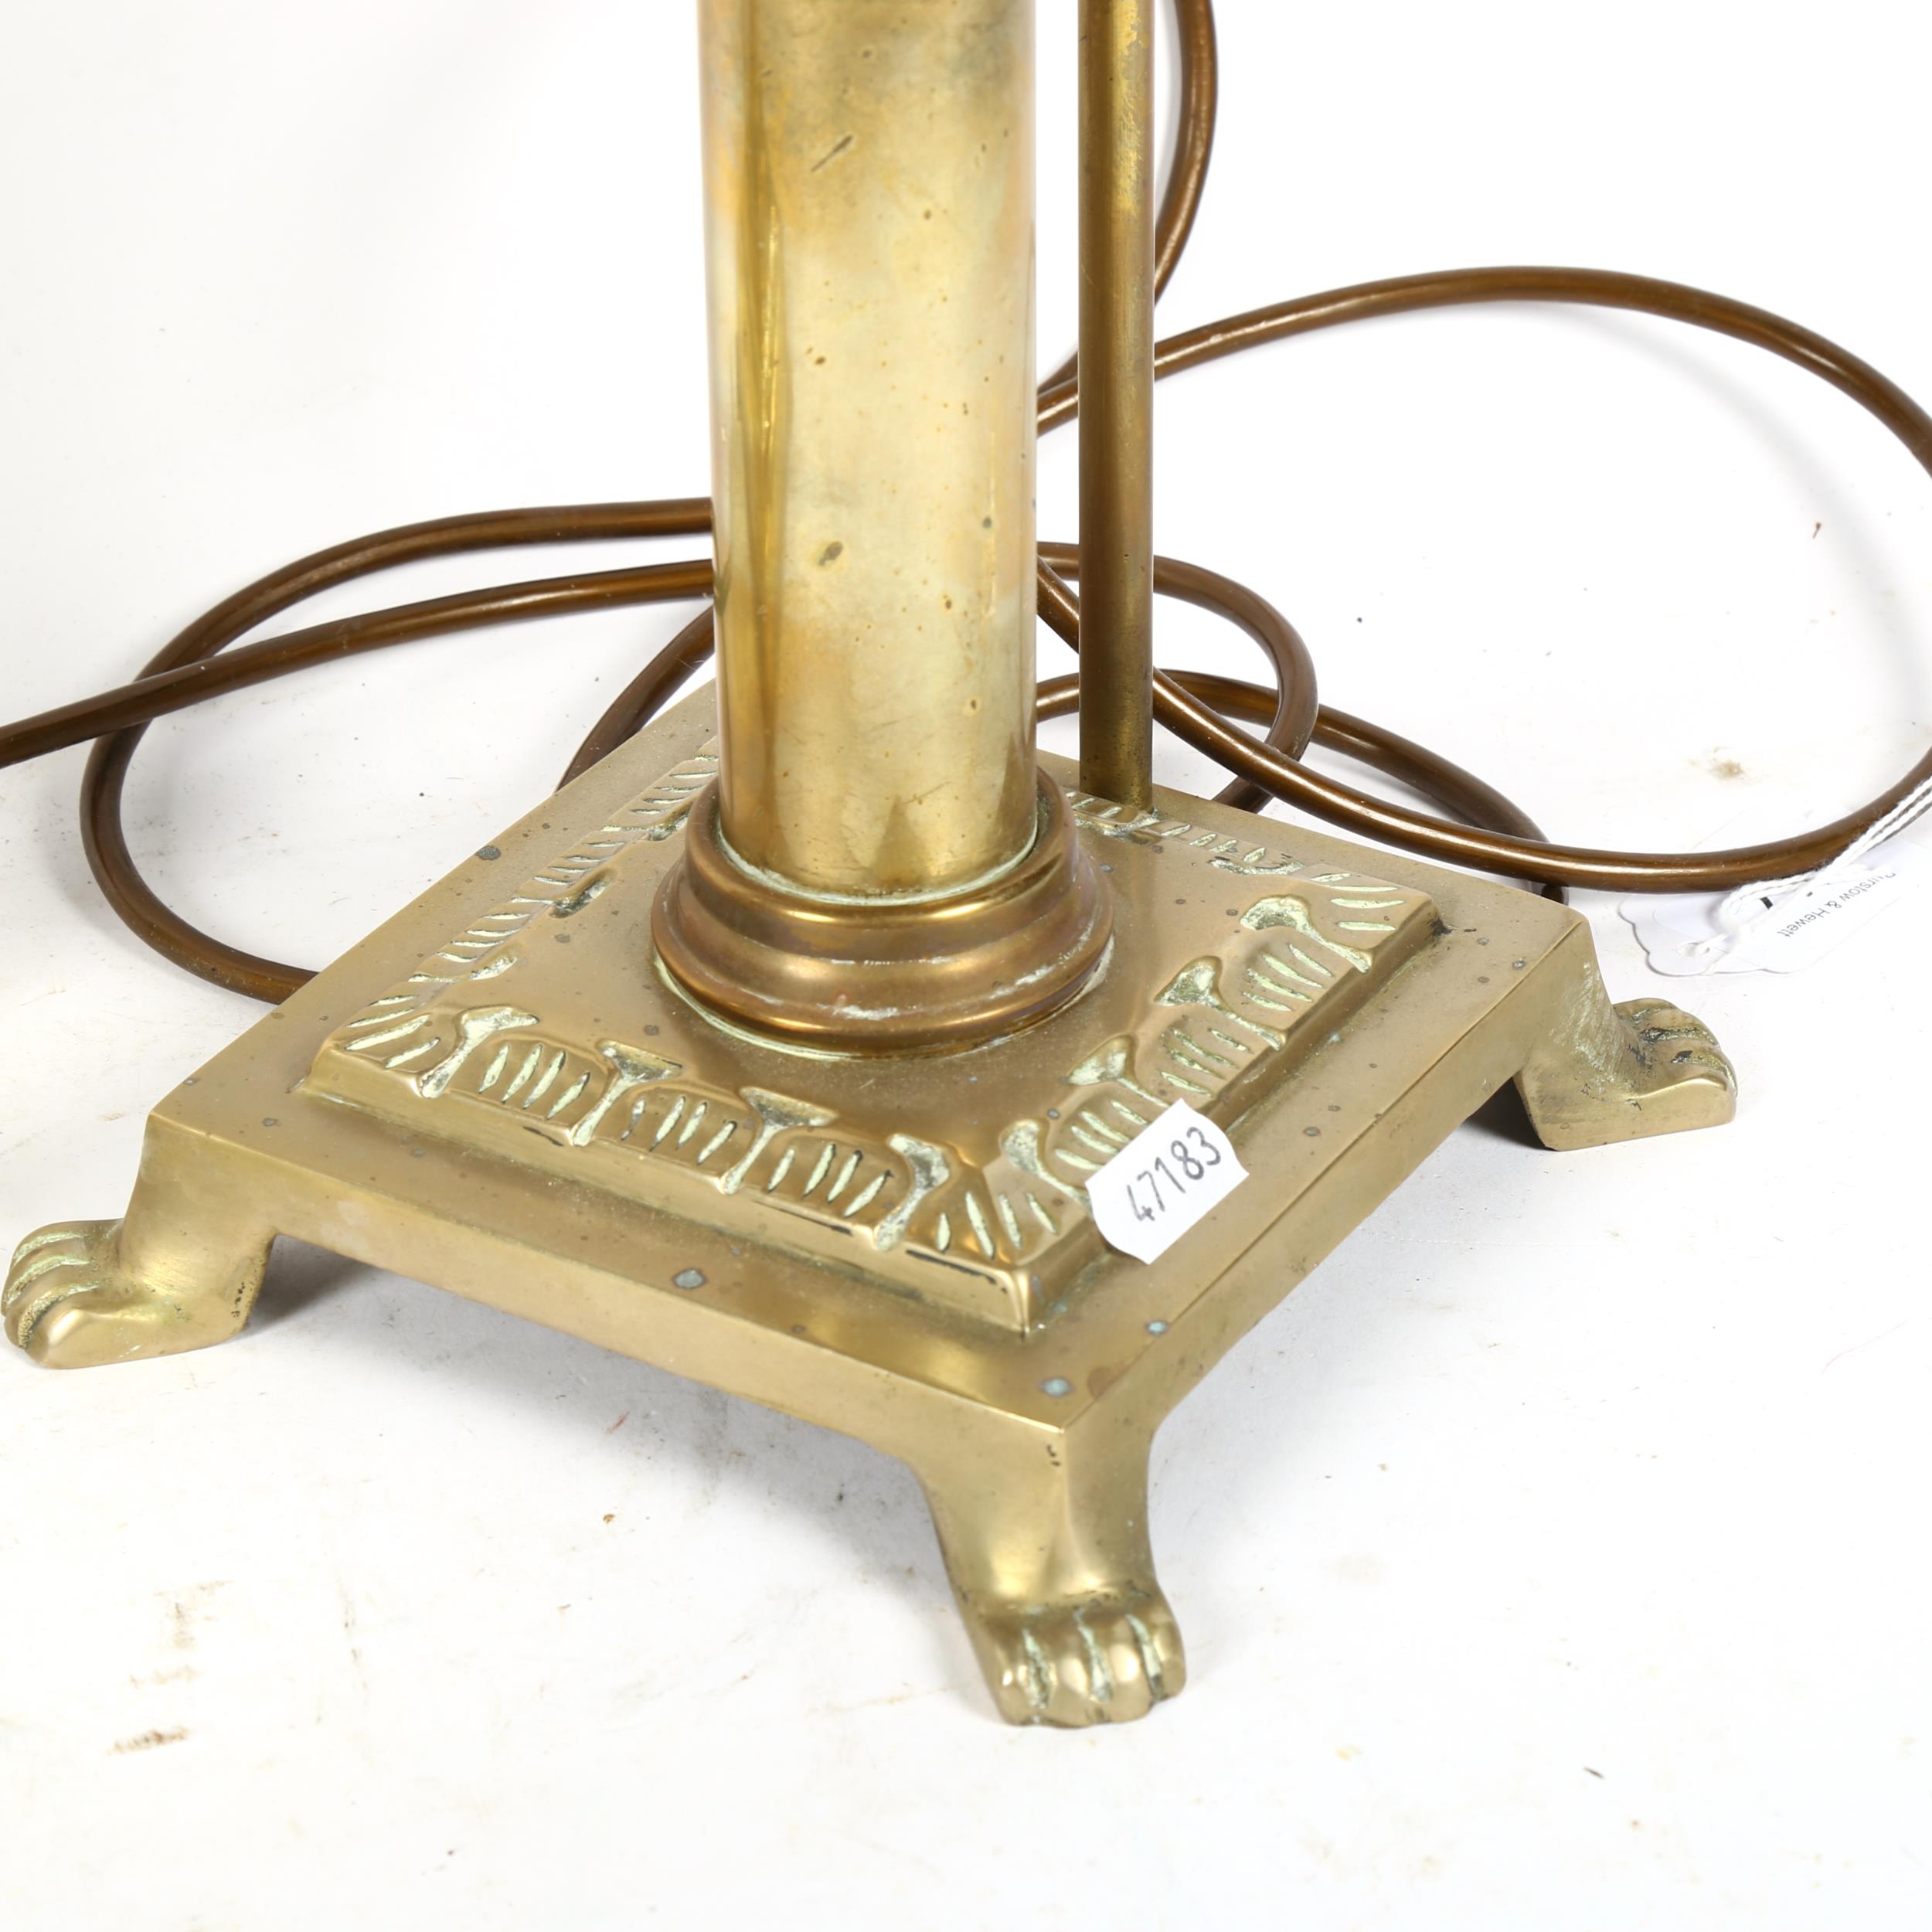 A pair of Antique brass oil lamps with adjustable shade converted to electric - Image 2 of 2